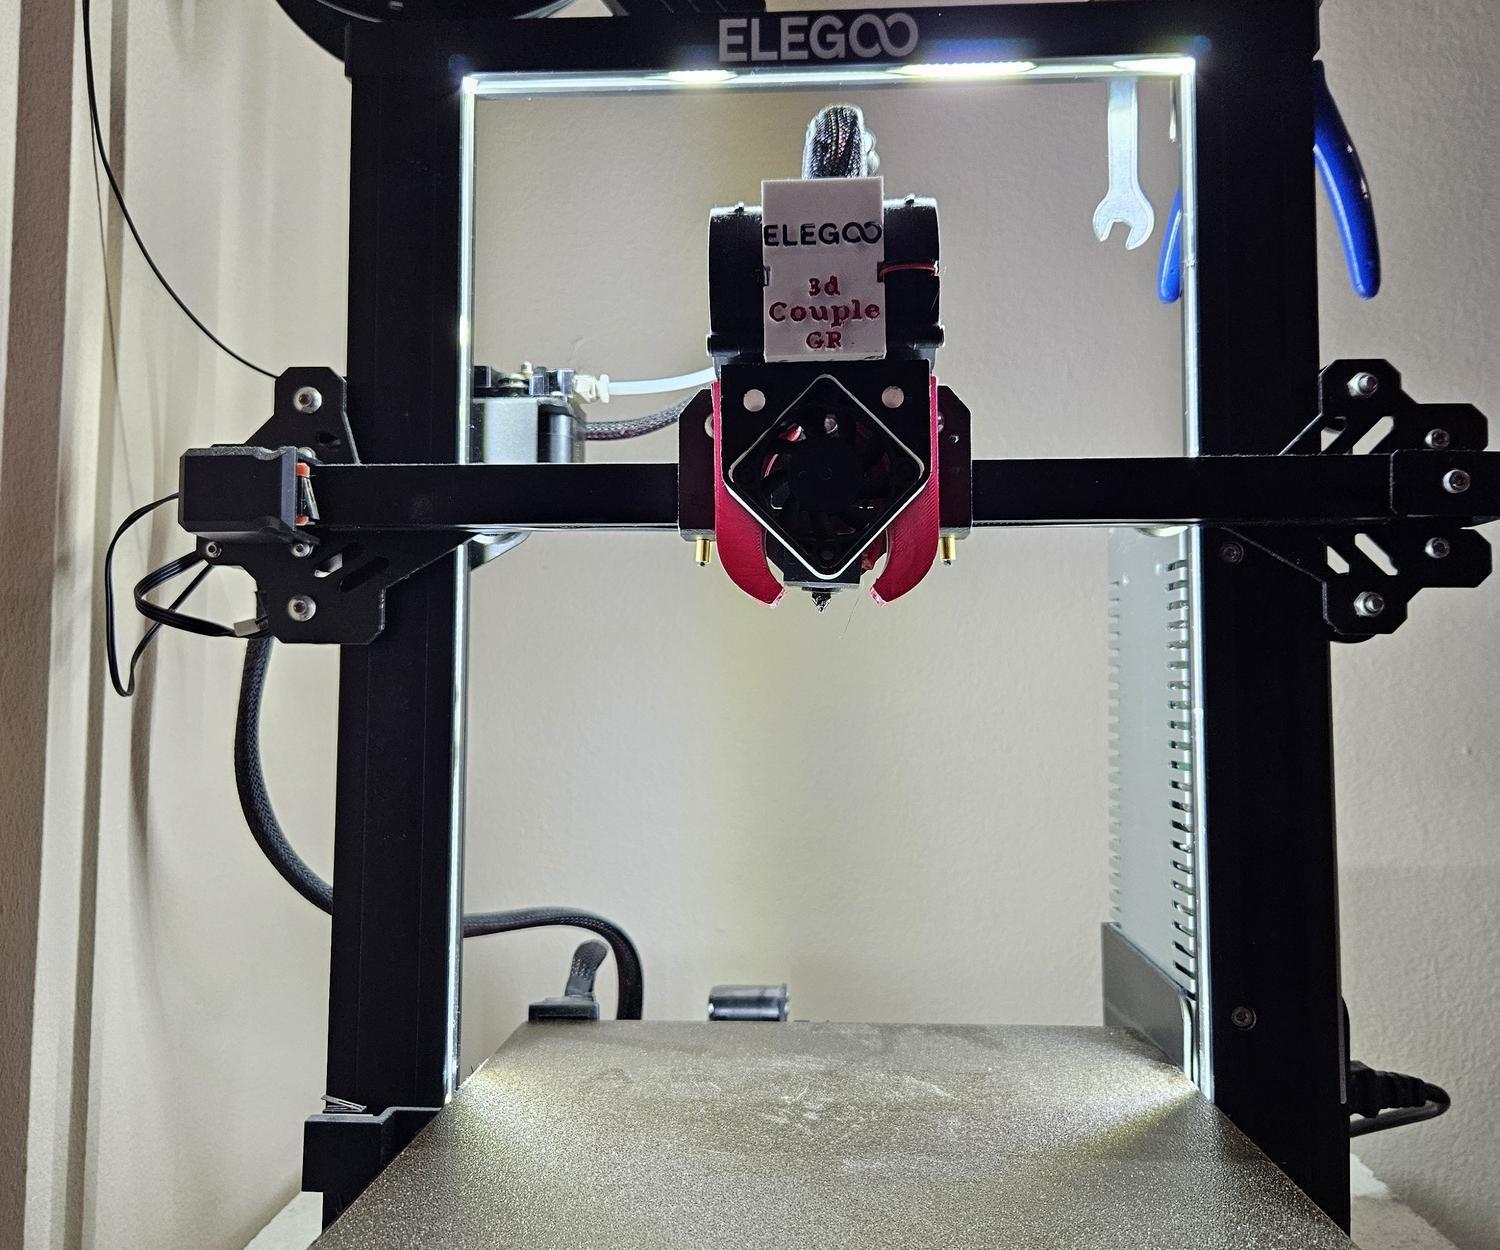 Add Led Light to Your 3d Printer!